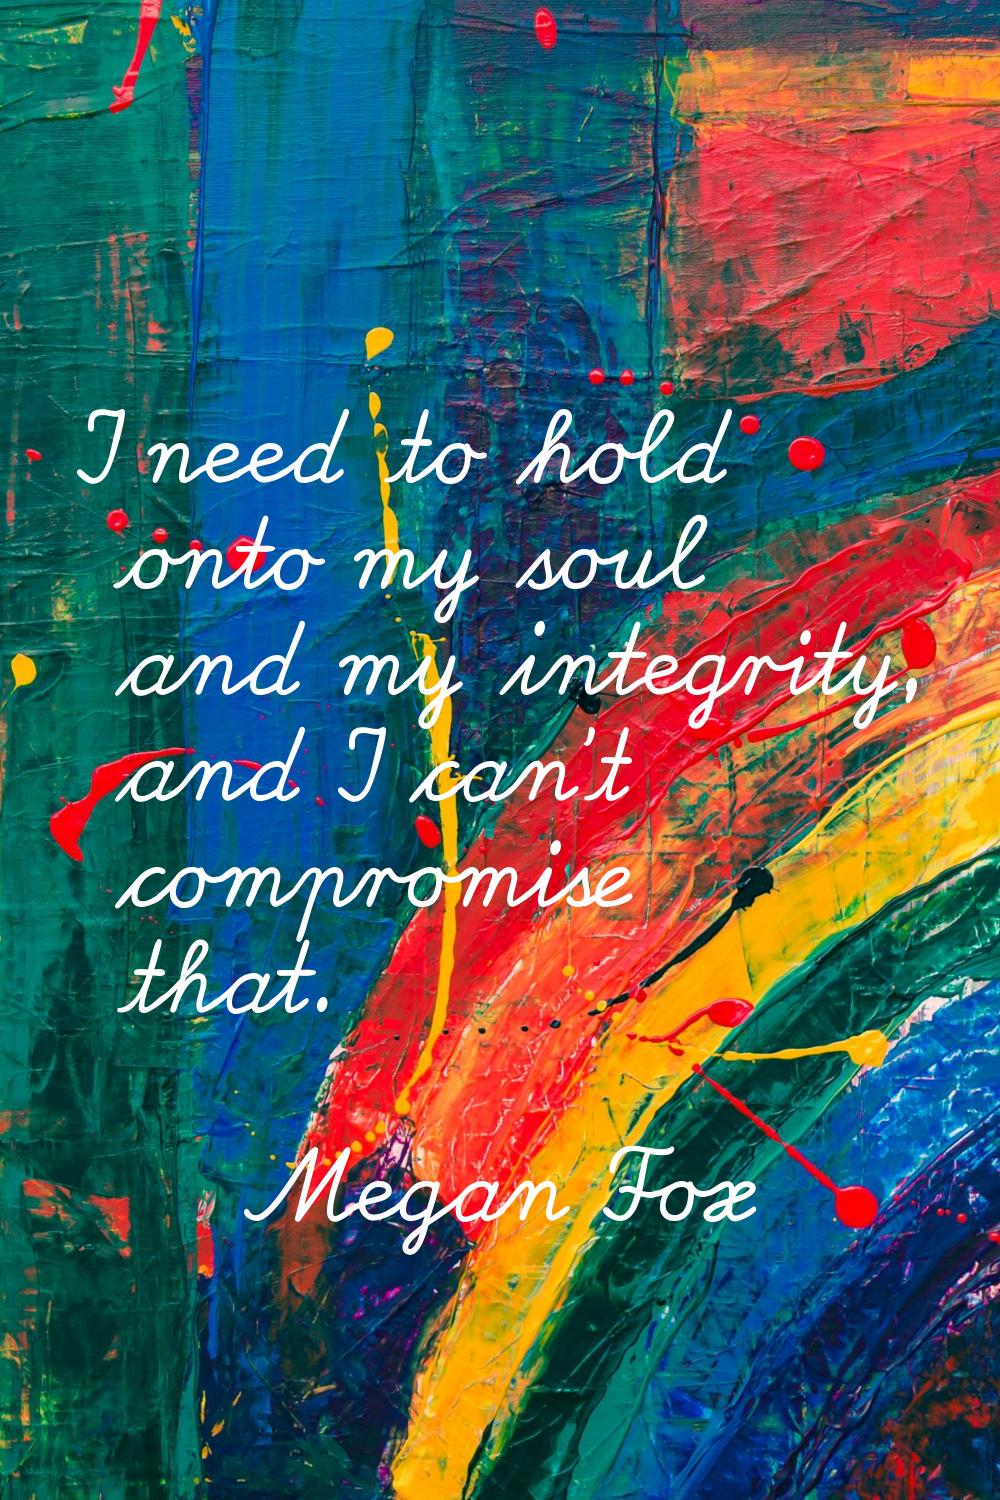 I need to hold onto my soul and my integrity, and I can't compromise that.